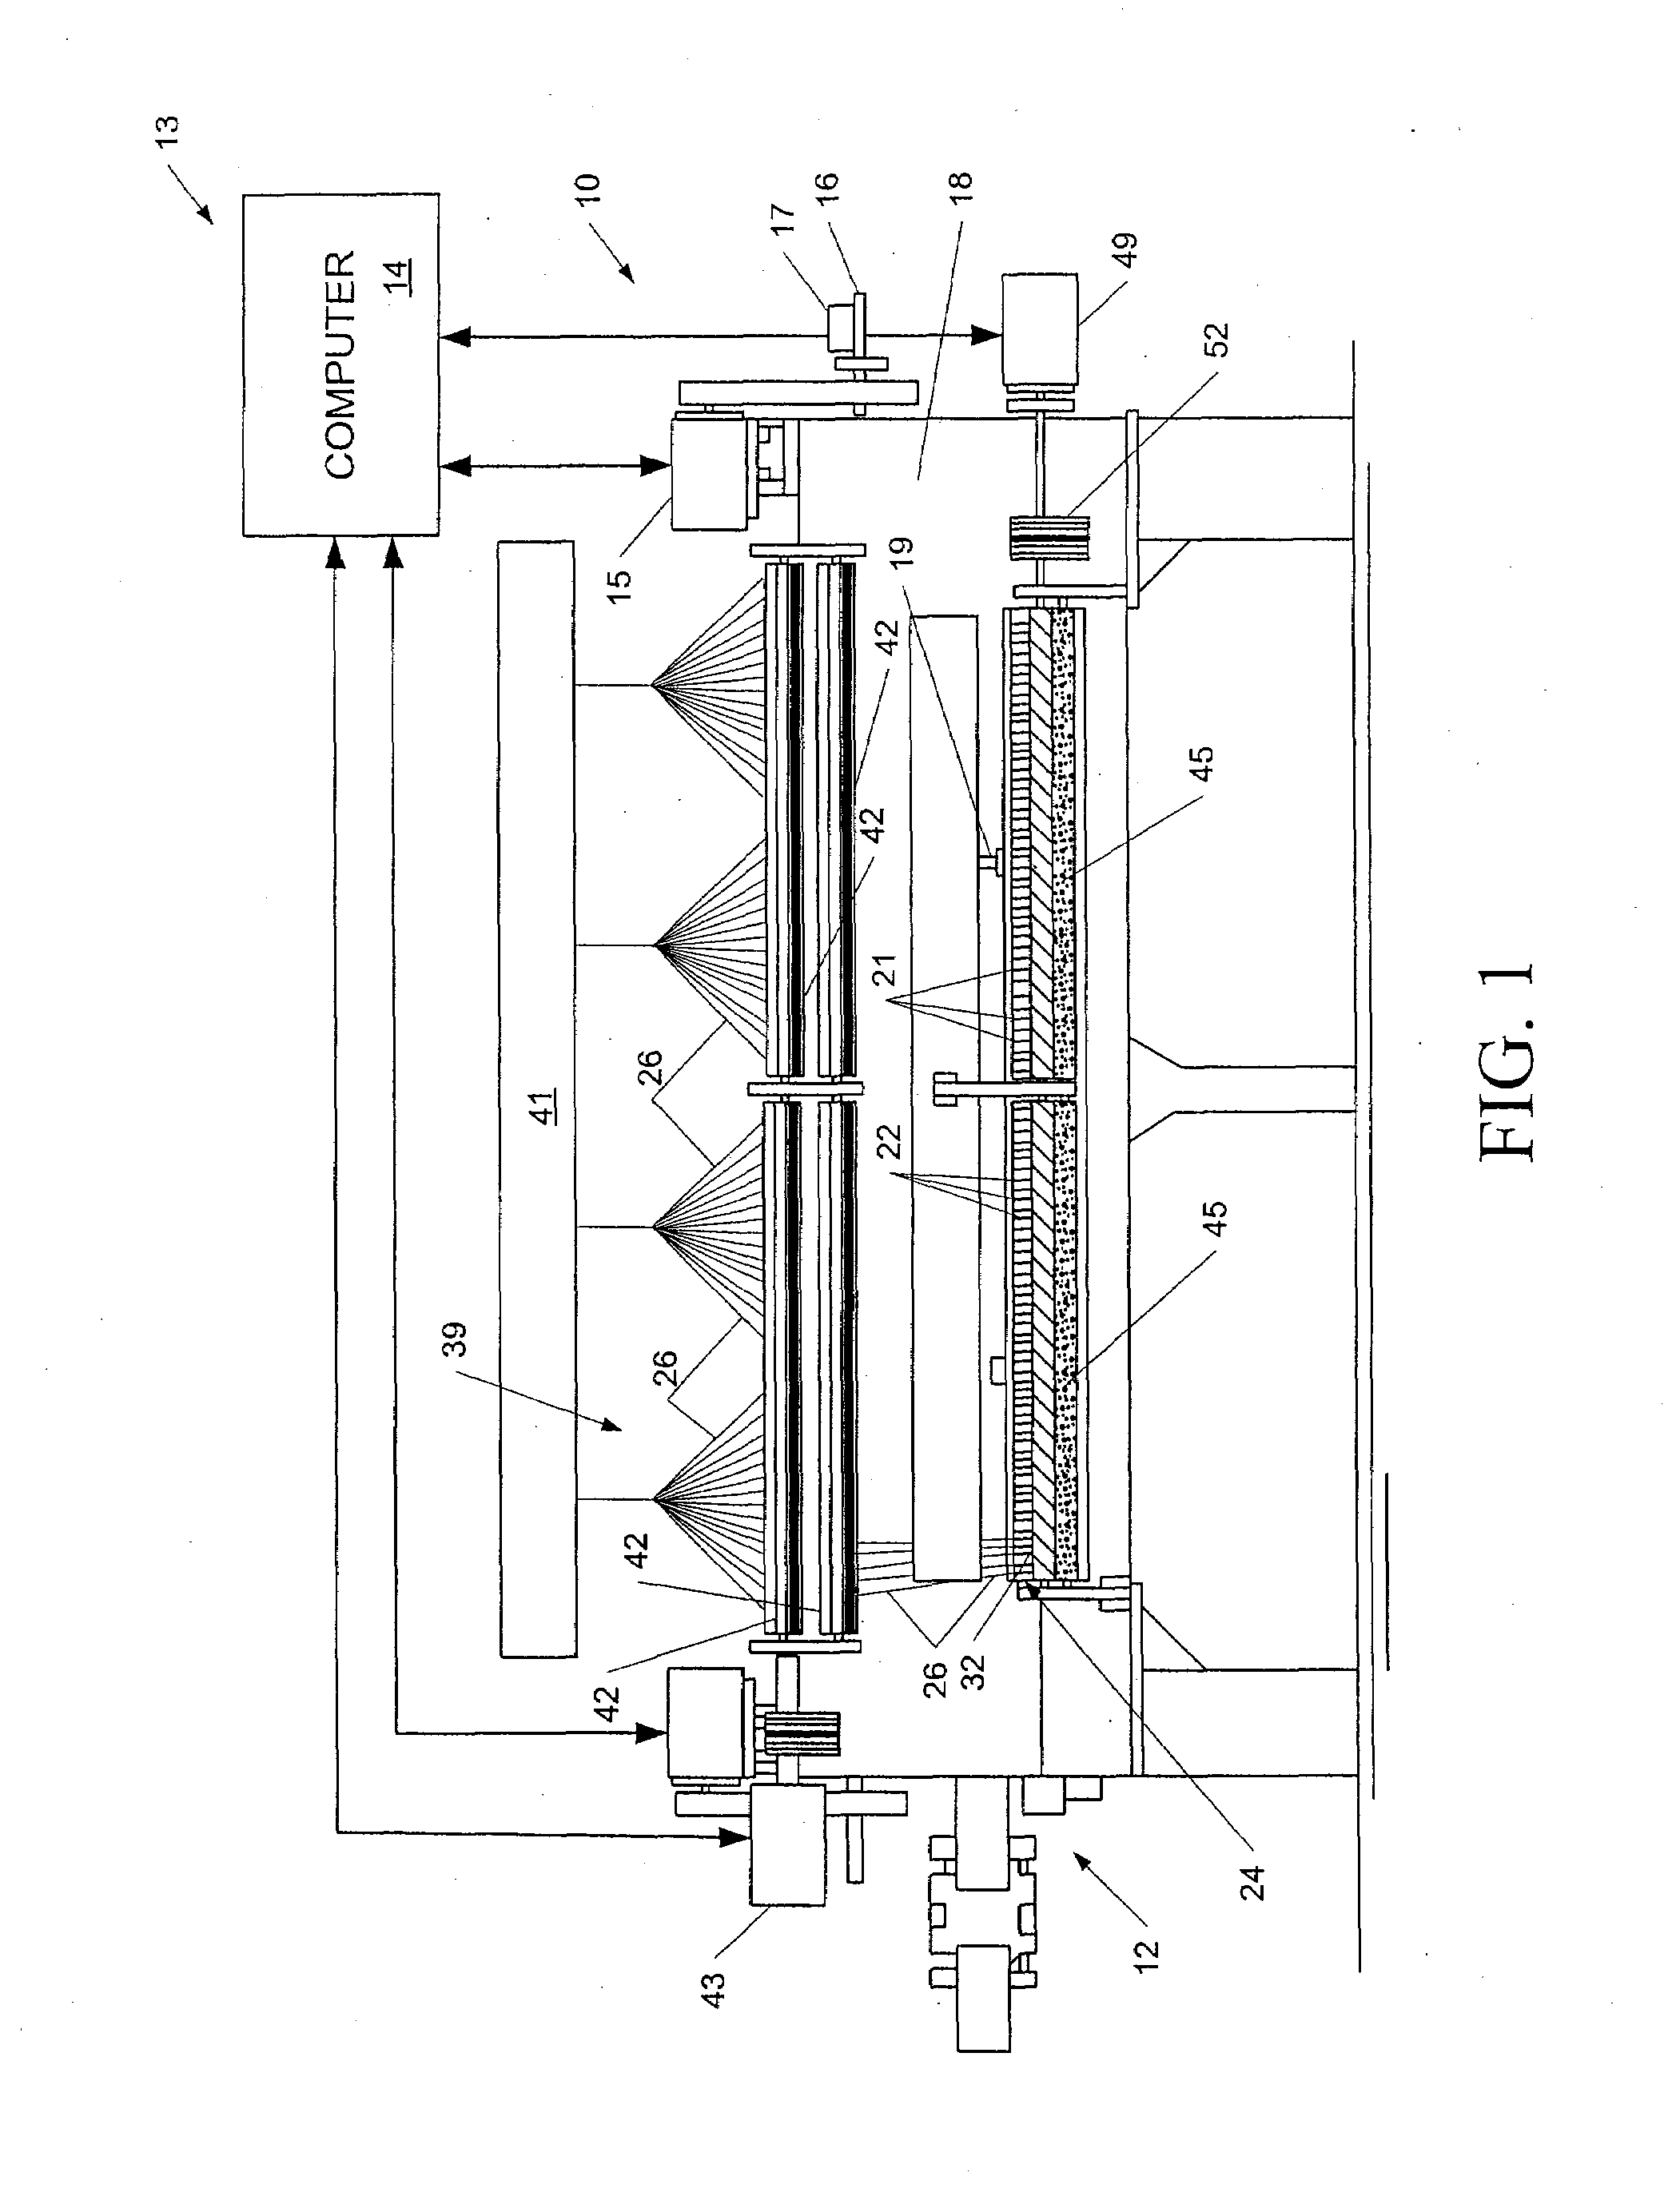 System and method for control of the backing feed for a tufting machine